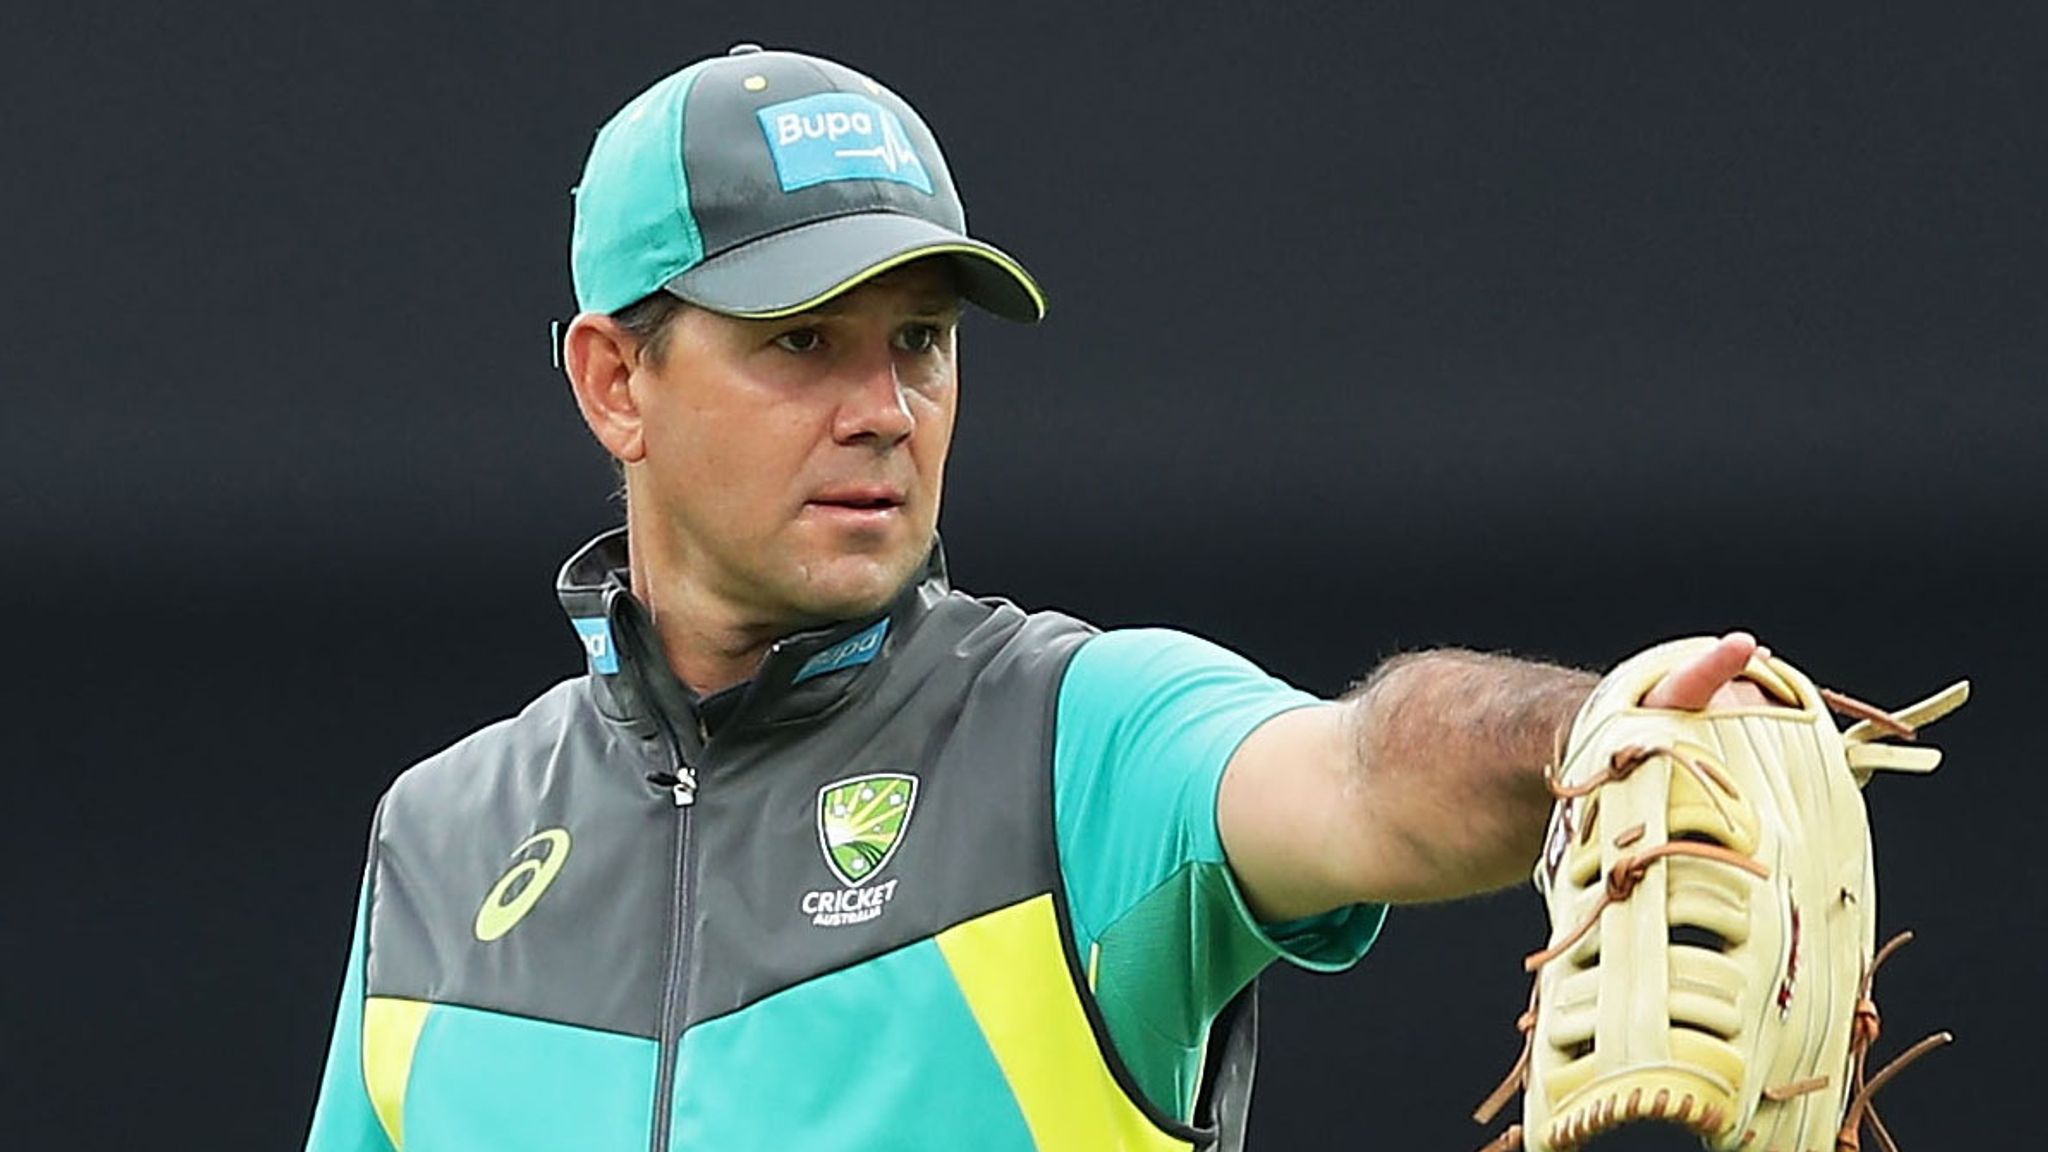 Ricky Ponting joins Australia coaching staff ahead of World Cup | Cricket News | Sky Sports